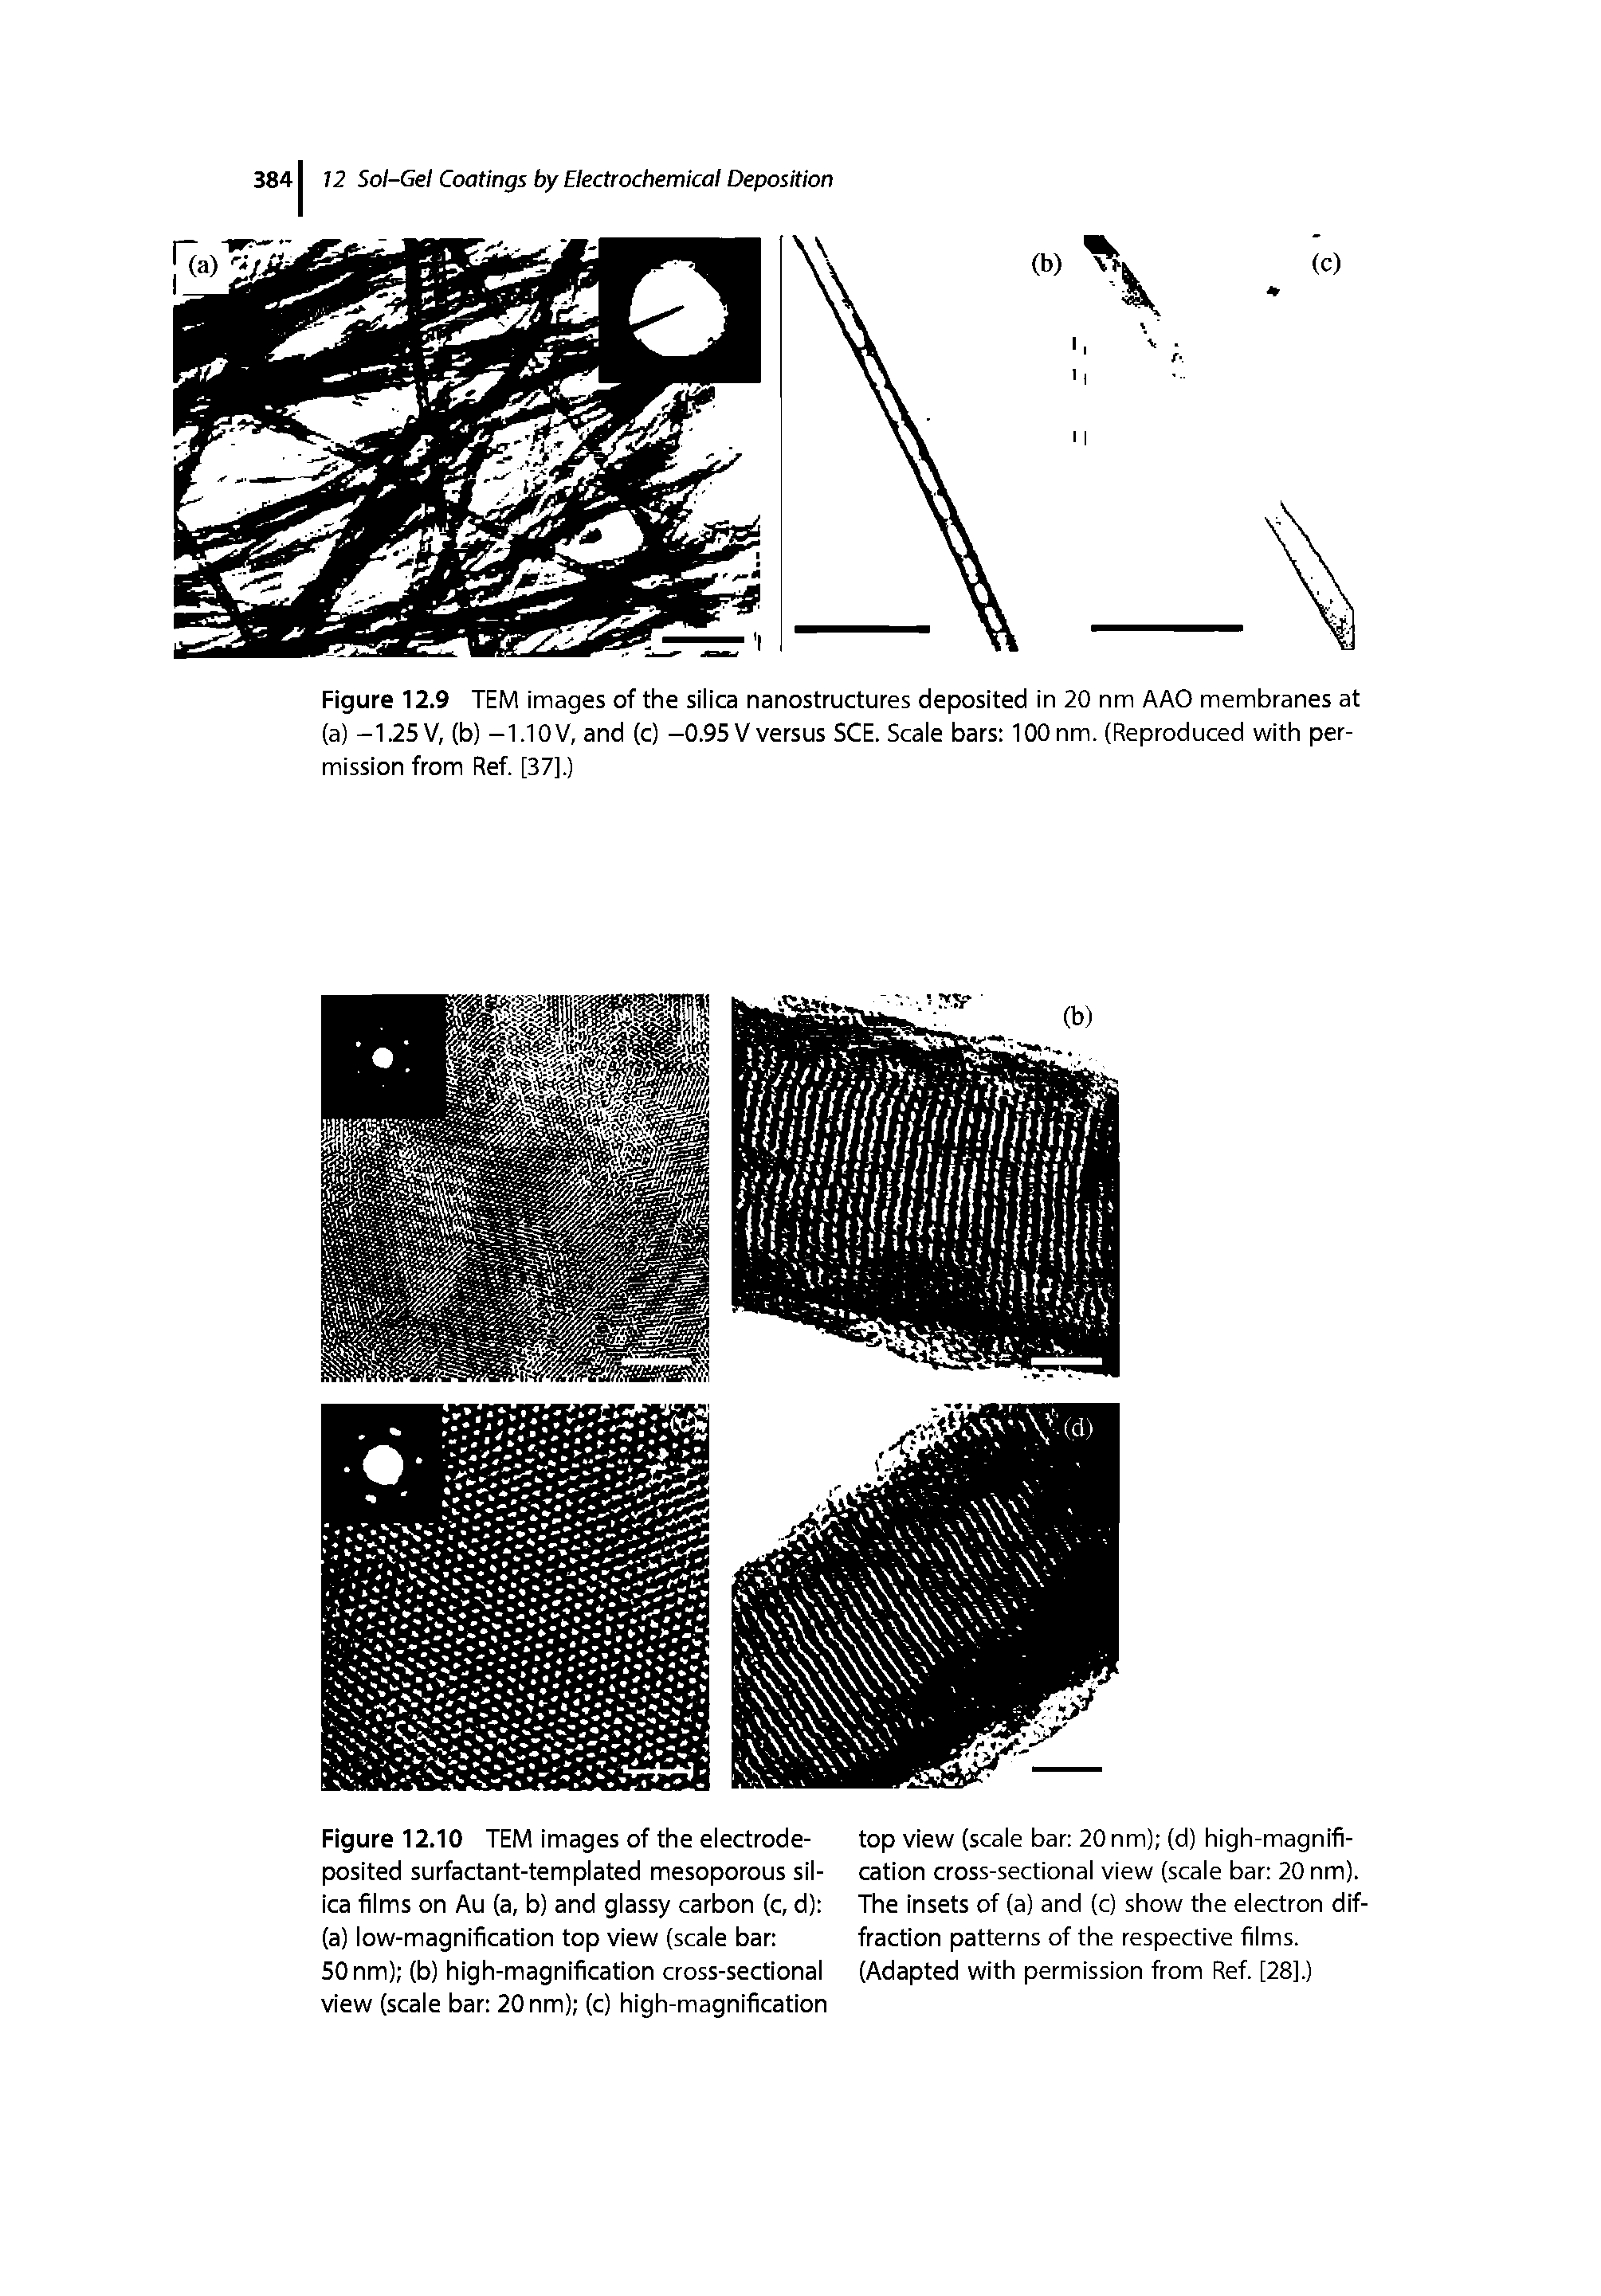 Figure 12.9 TEM images of the silica nanostructures deposited in 20 nm AAO membranes at (a) -125 V, (b) -1.10V, and (c) -0.95 V versus SCE. Scale bars 100 nm. (Reproduced with permission from Ref [37].)...